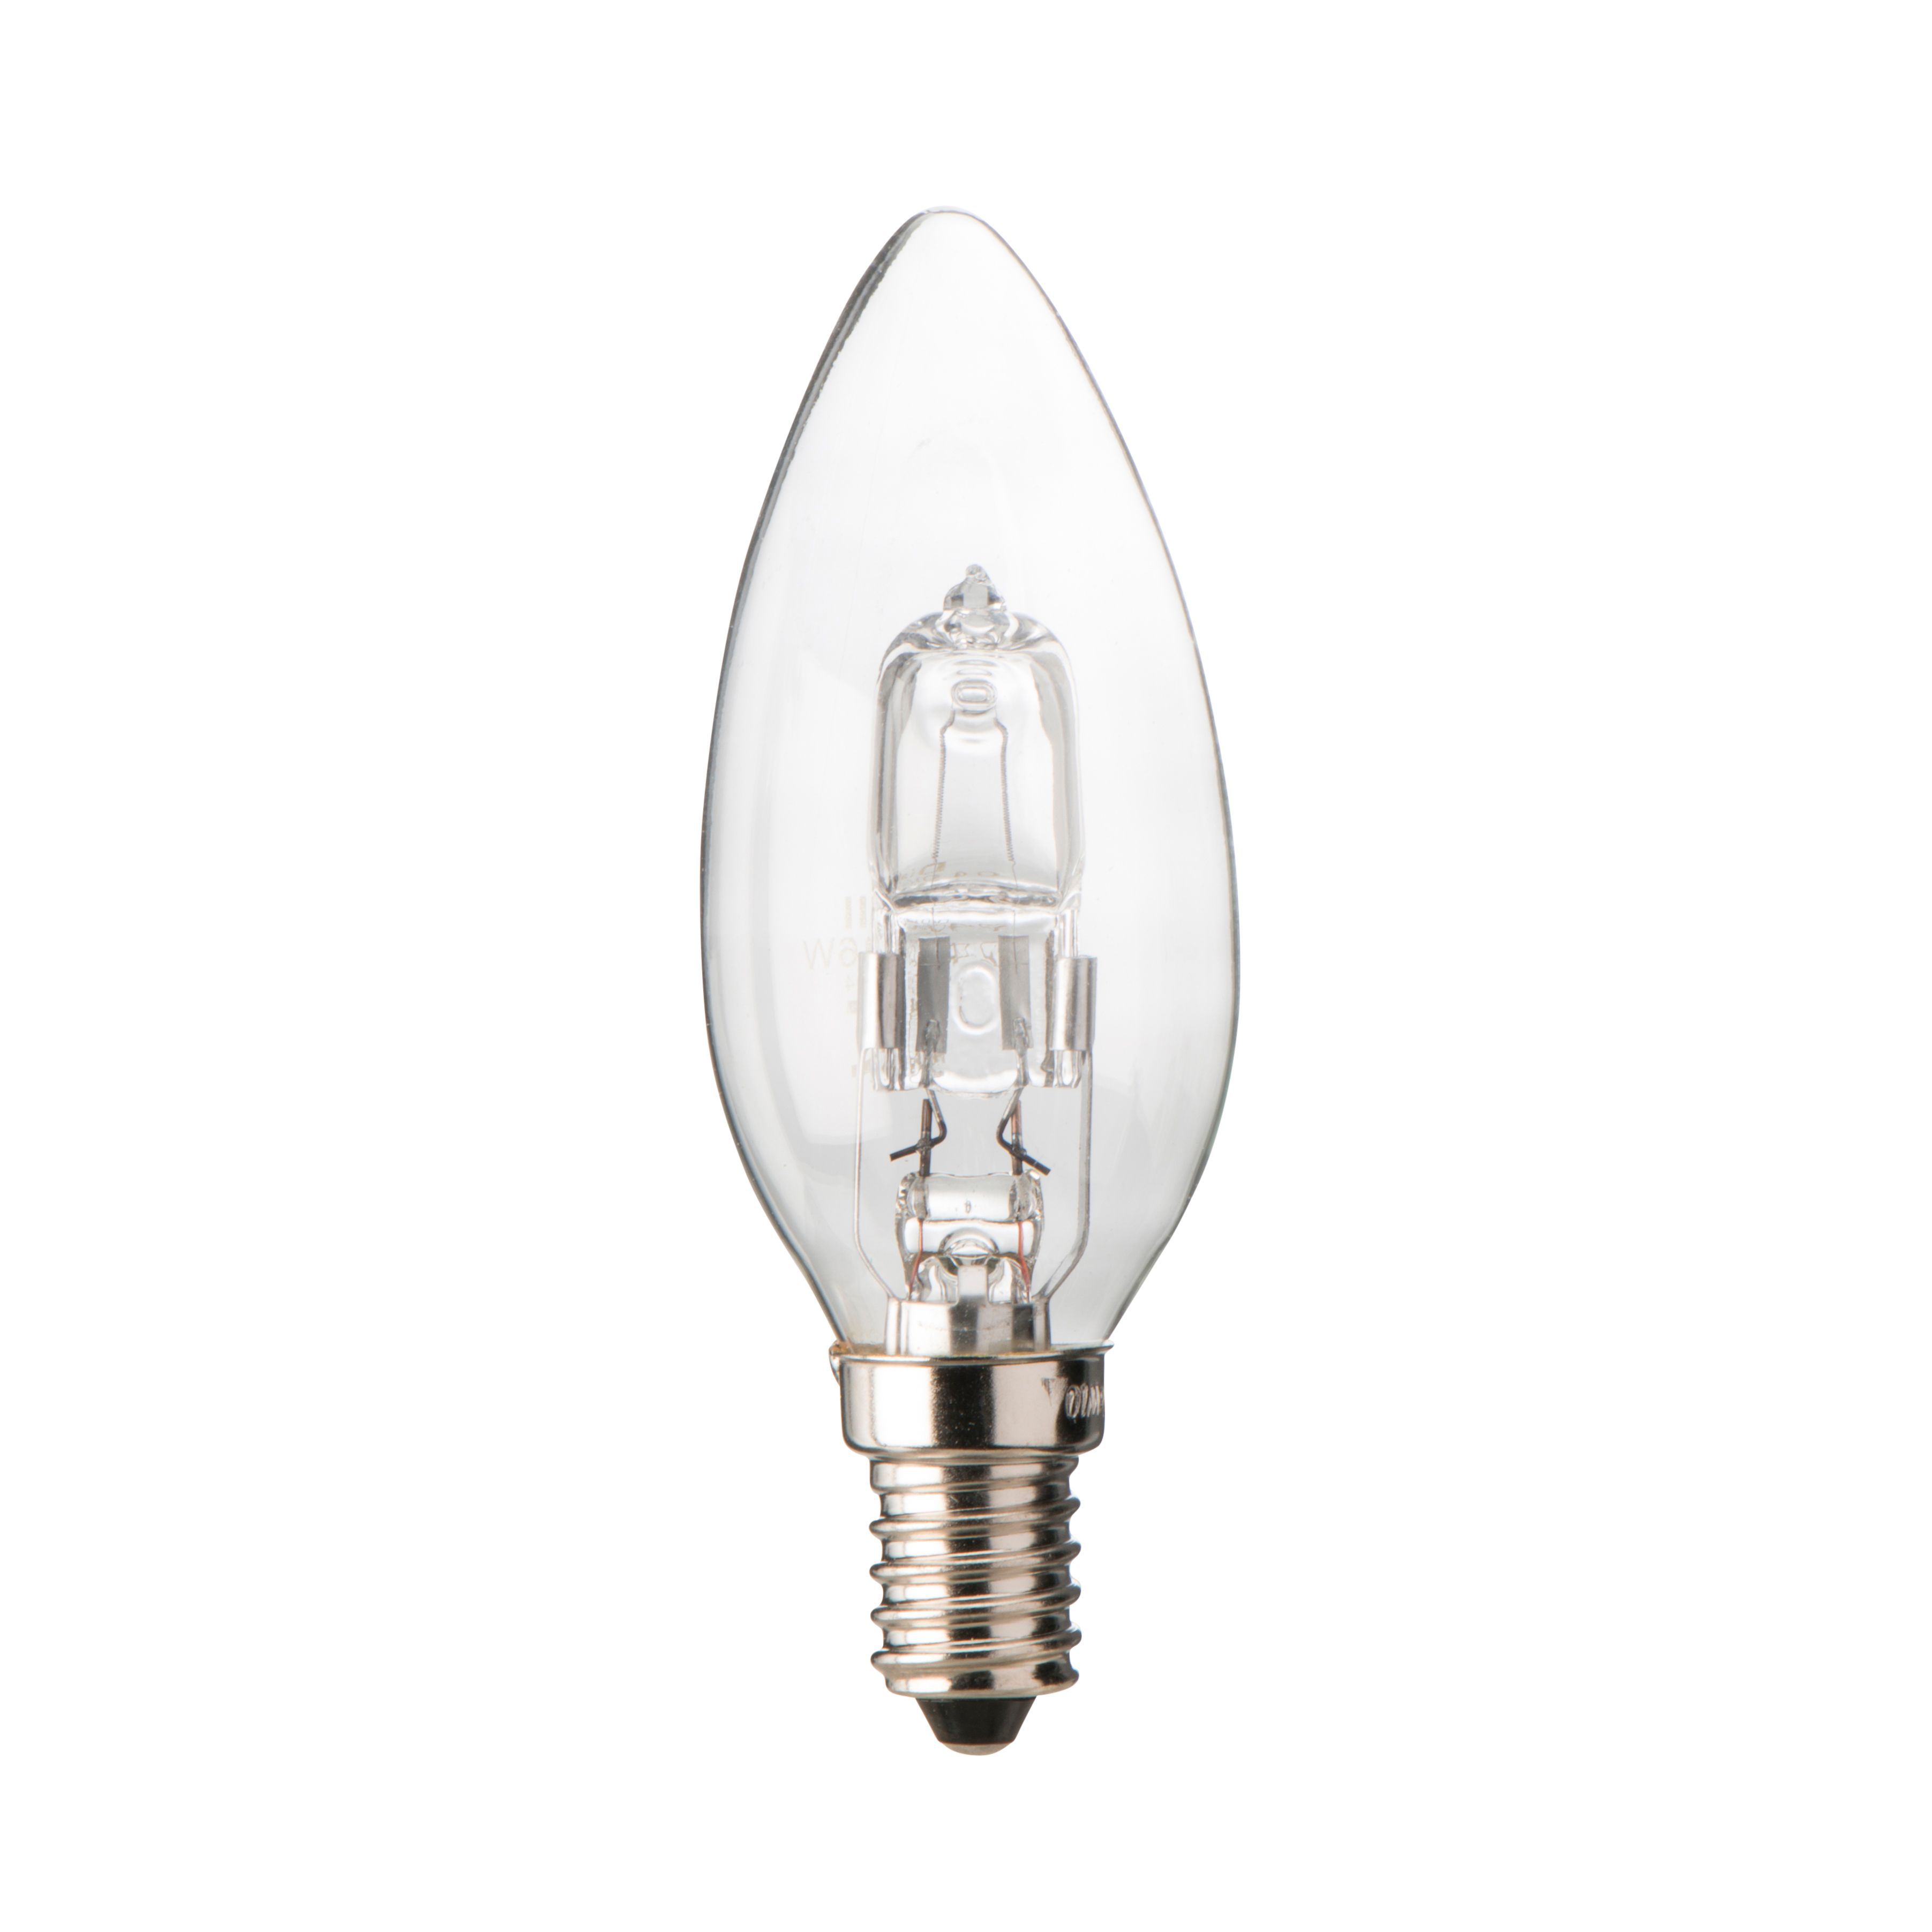 Diall E14 46W 702lm Dimmable Light bulb, Pack of 3